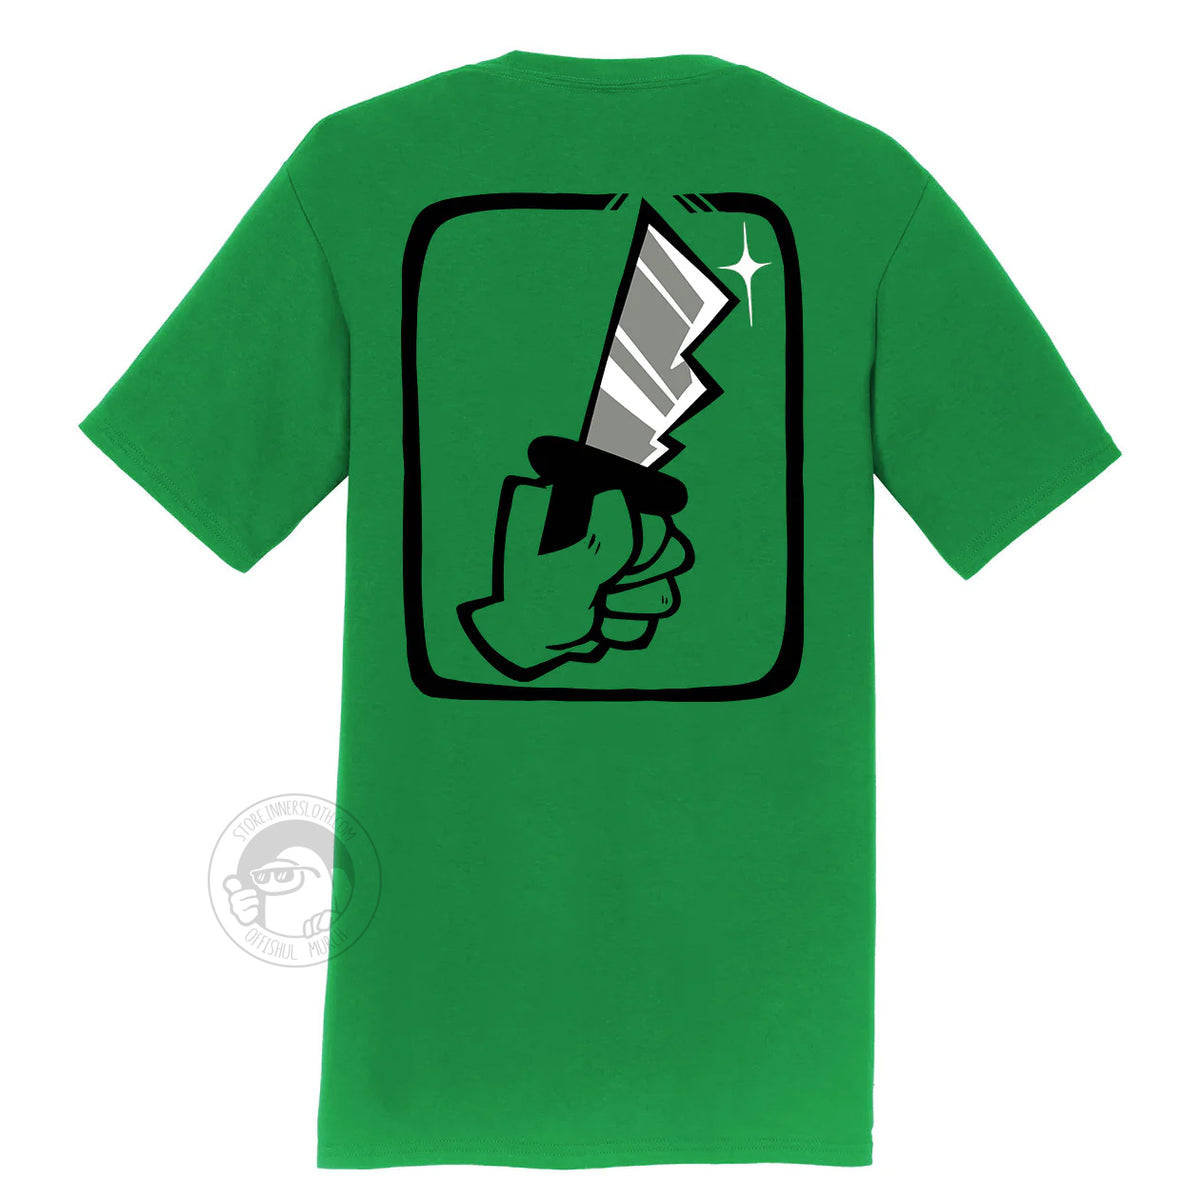 A product photo of the back of the Among Us: Shhhirt in green. The back art is a large hand holding a knife.